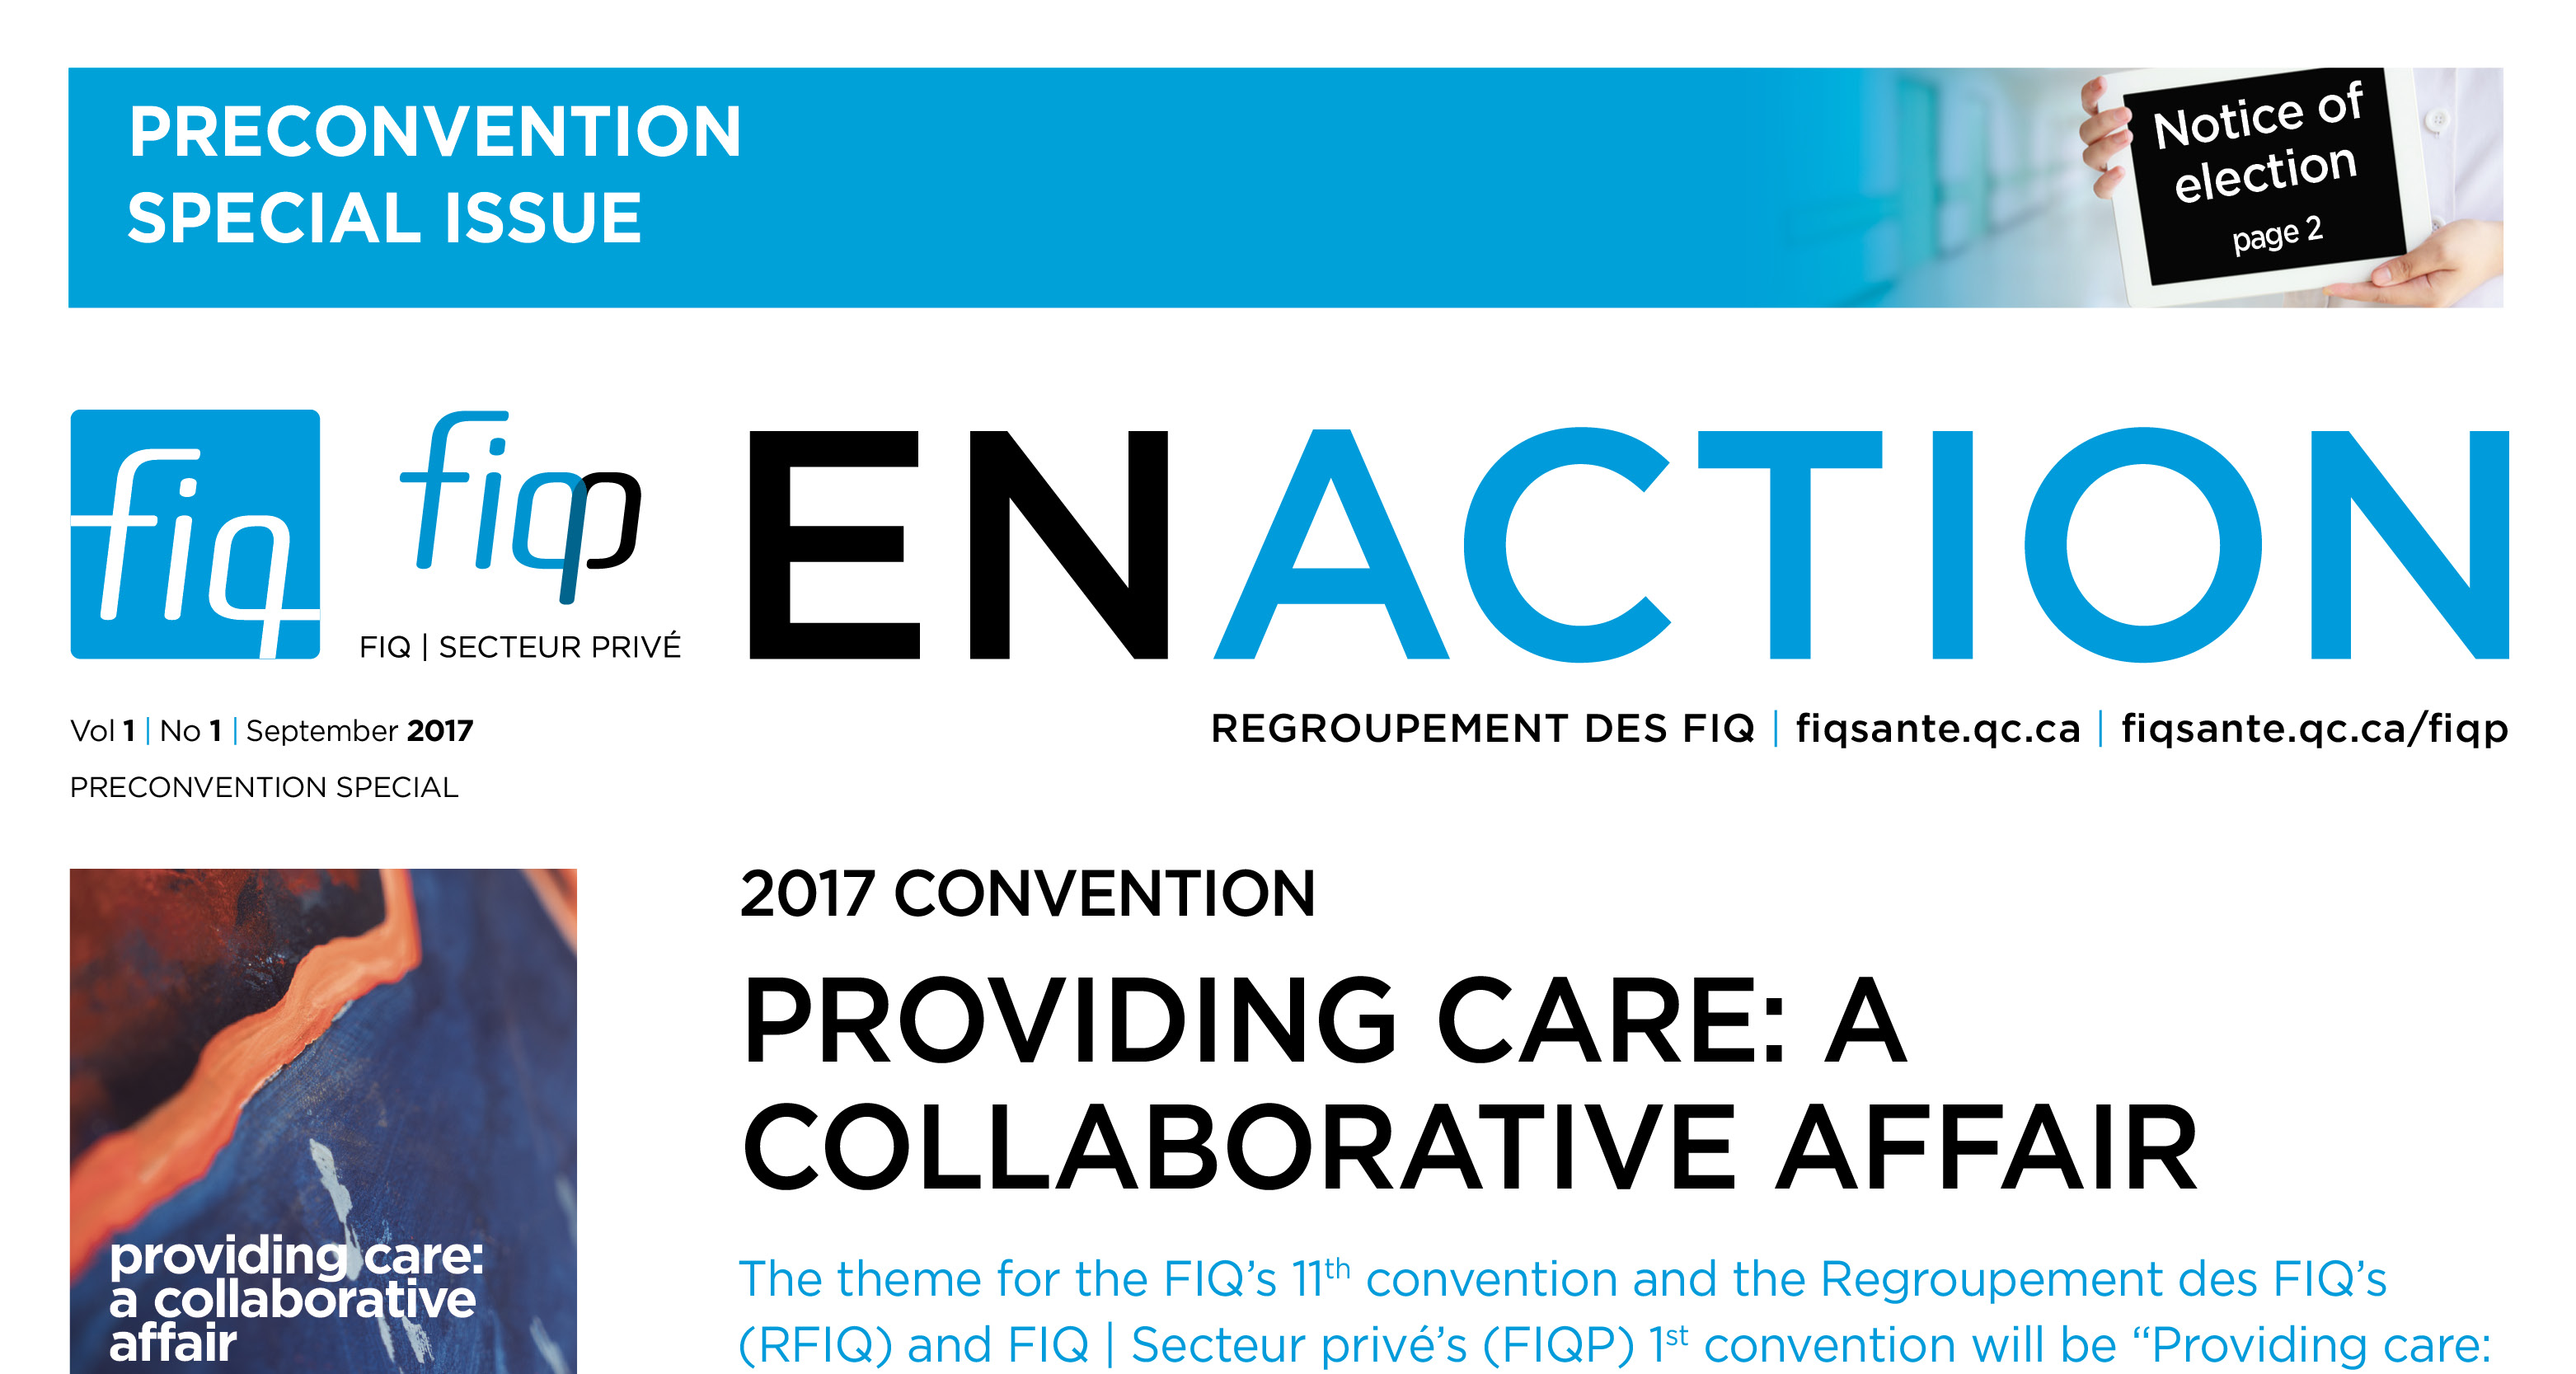 The preconvention FIQ en Action now available